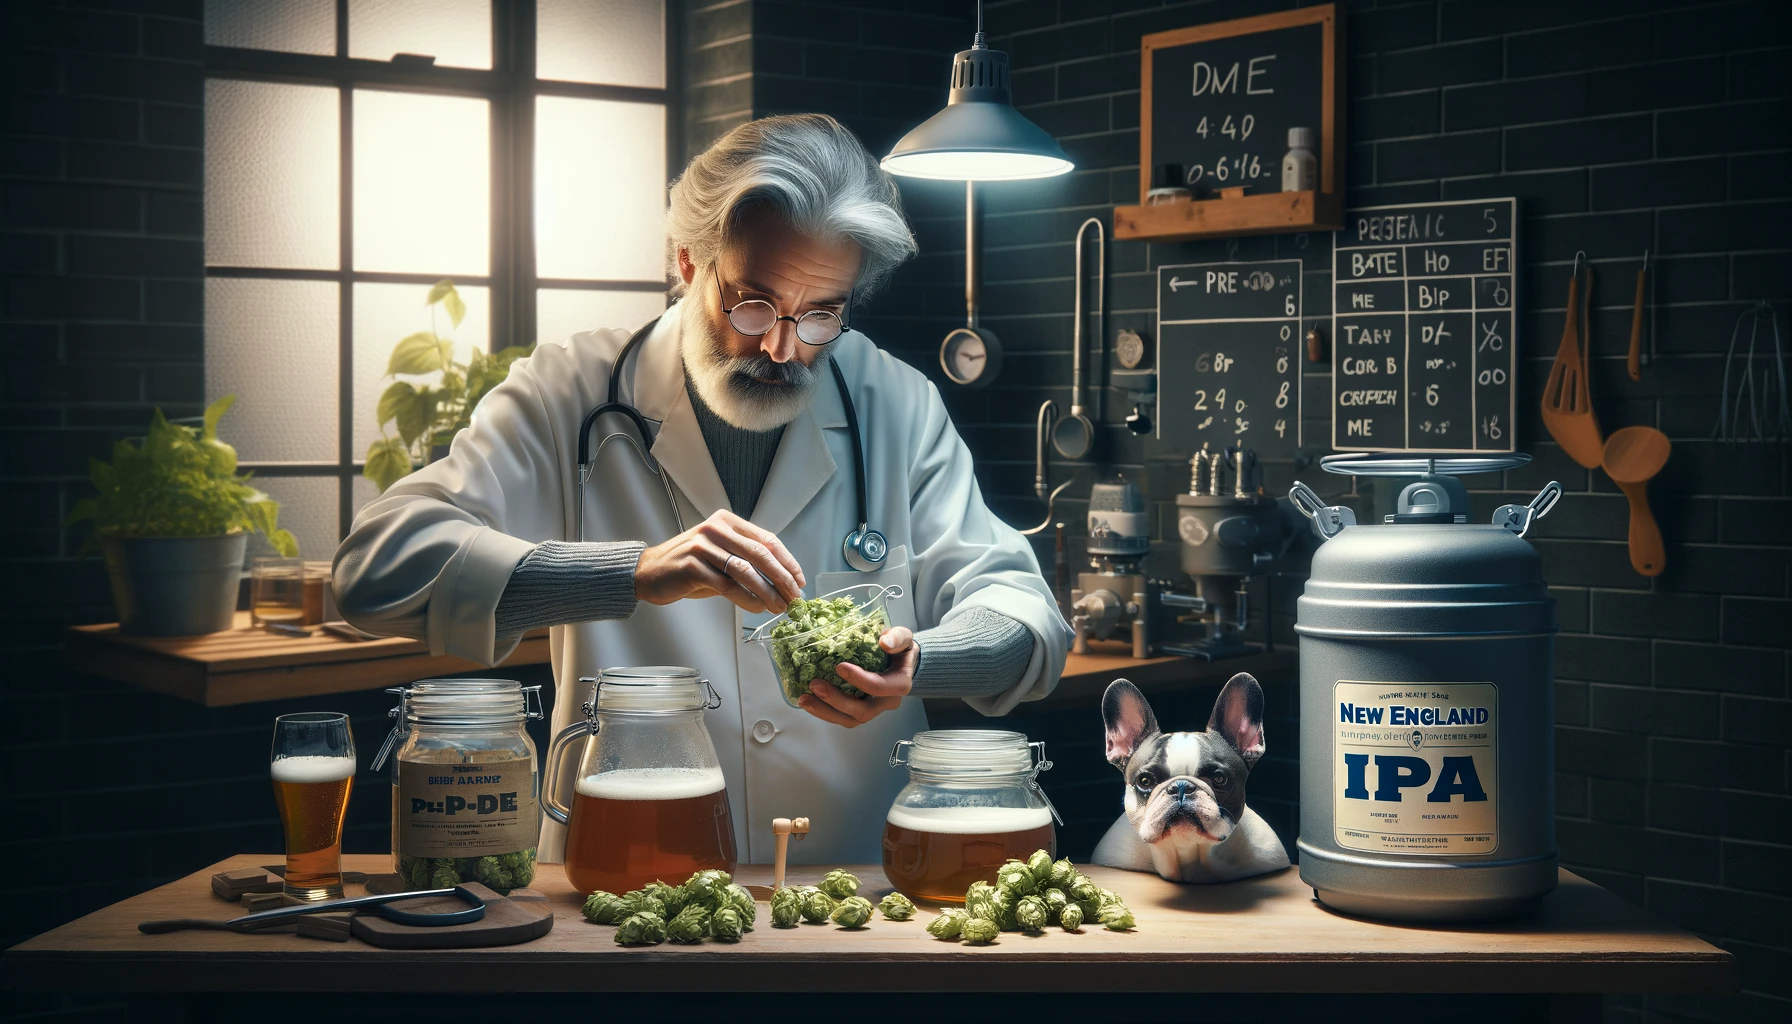 The scene captures the essence of simplicity and science in brewing with Dr. Hans preparing ingredients for the New England IPA Shake N Brew